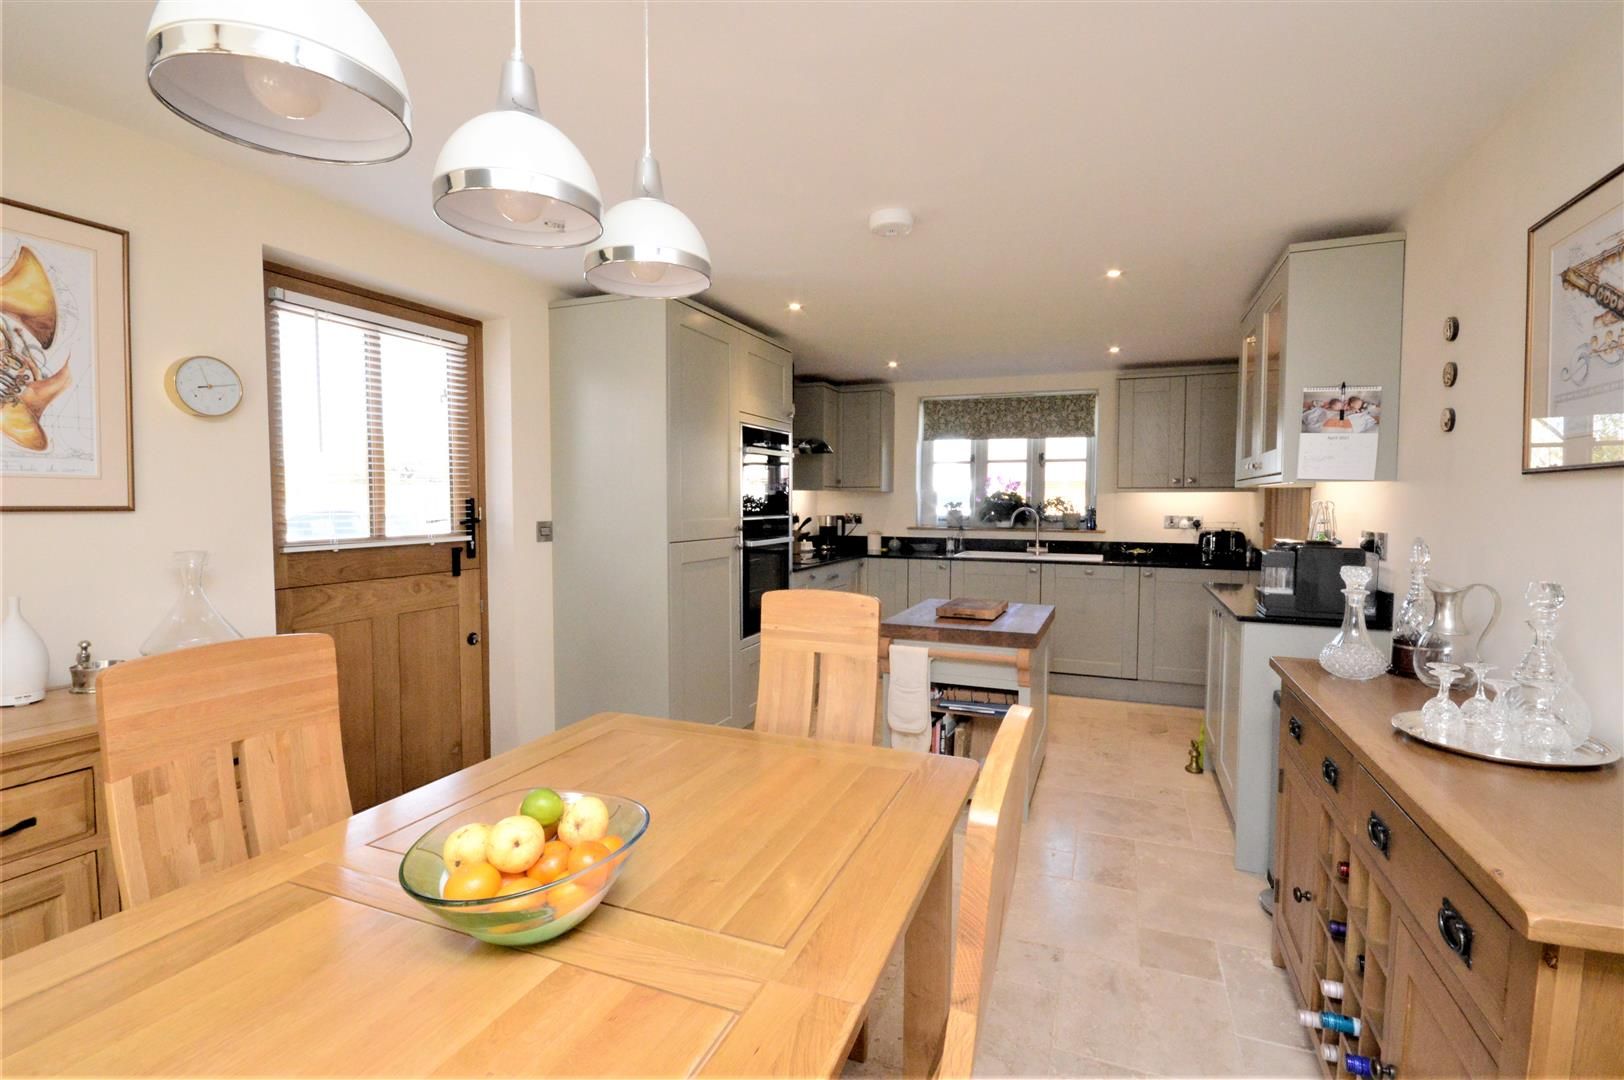 3 bed detached for sale in Winforton 5